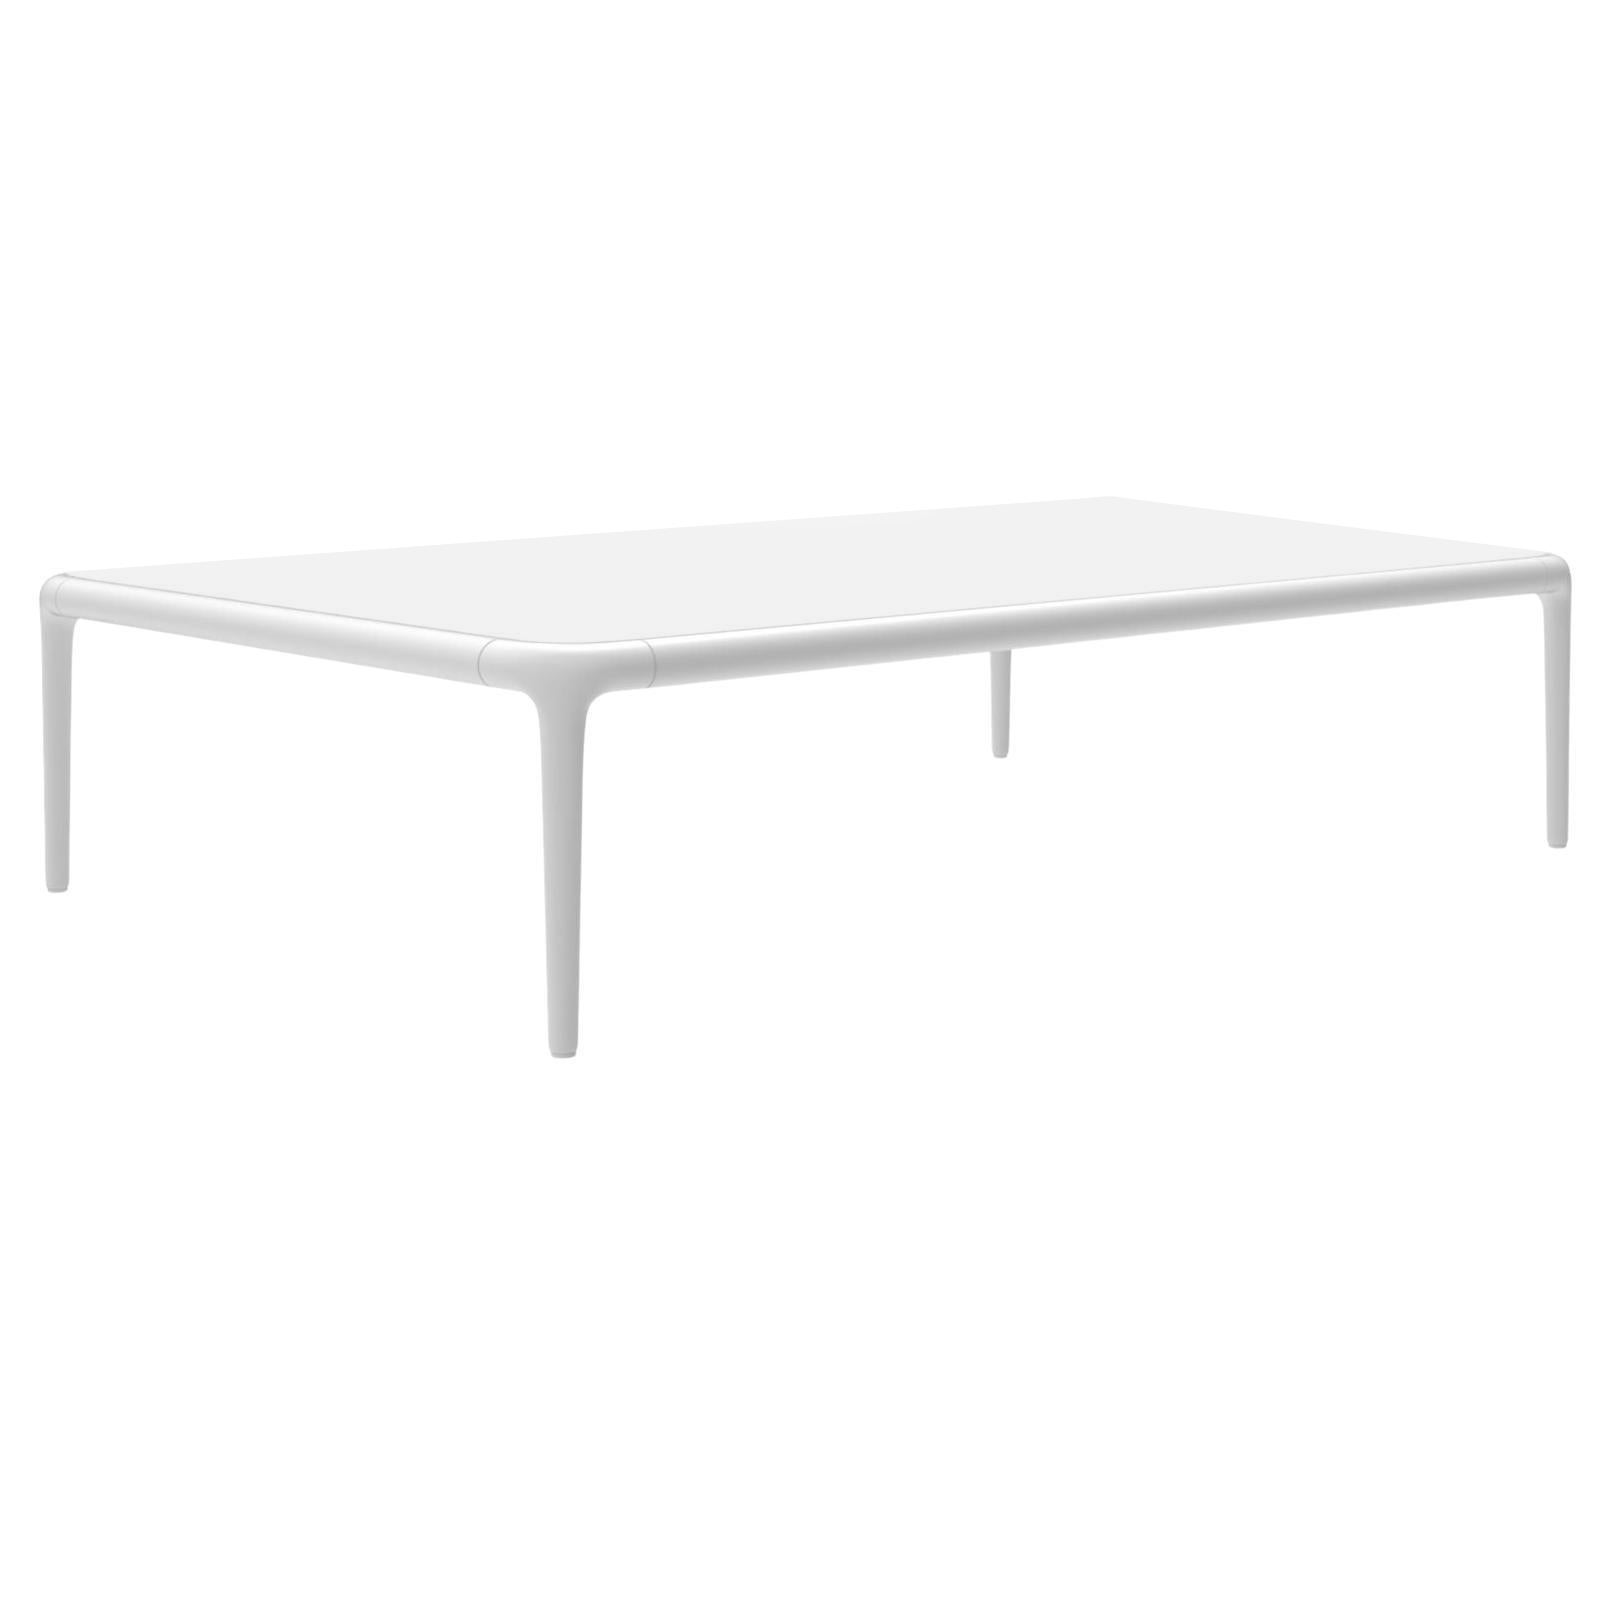 Xaloc White Coffee Table 120 with Glass Top by Mowee For Sale